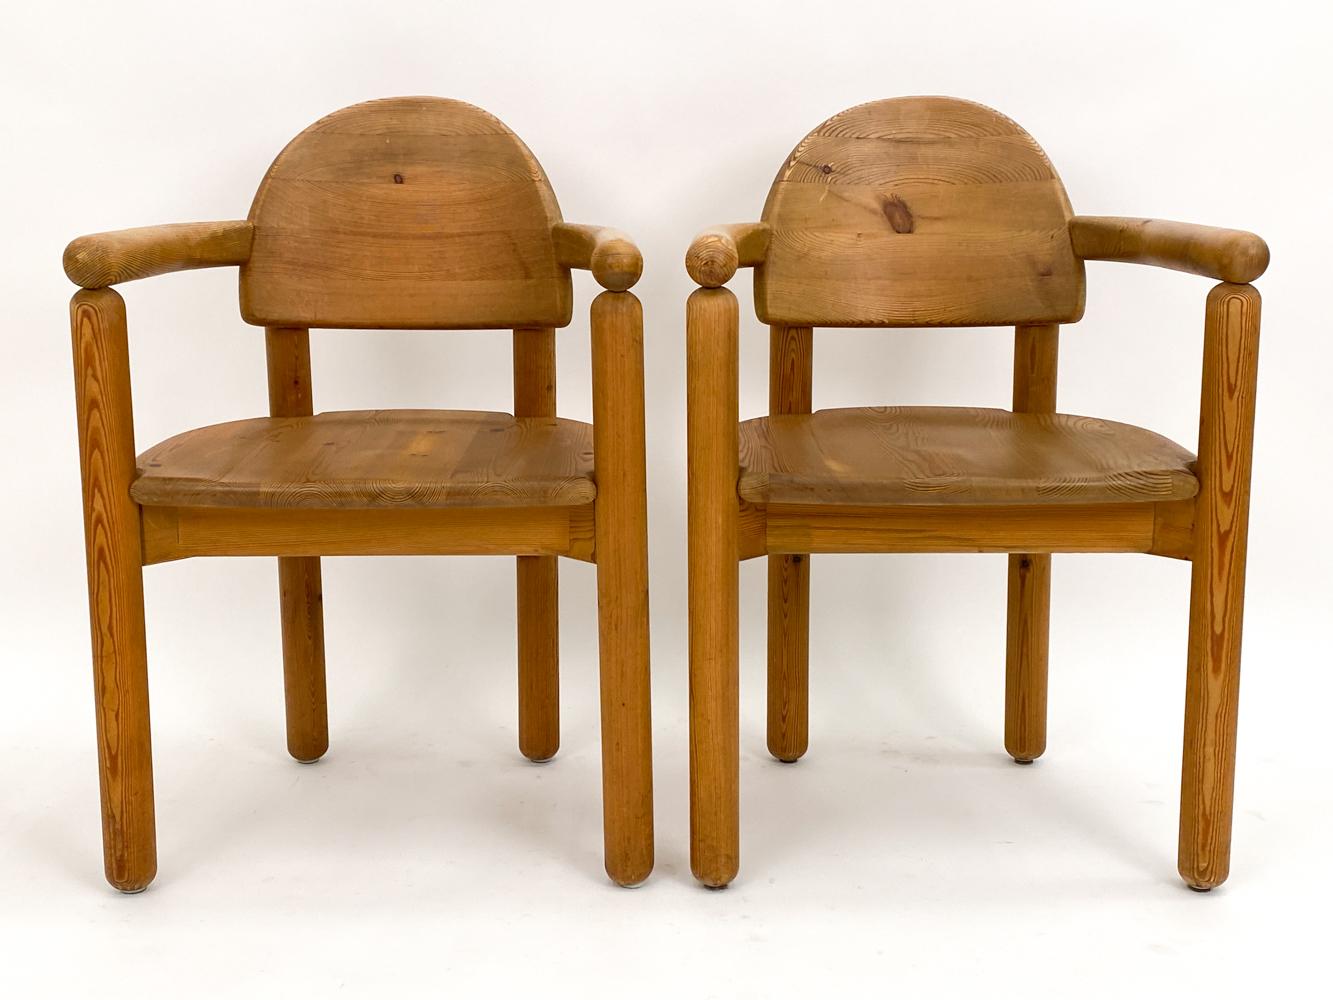  Pair of Pine Armchairs by Rainer Daumiller, Denmark, circa 1980 In Good Condition For Sale In Norwalk, CT